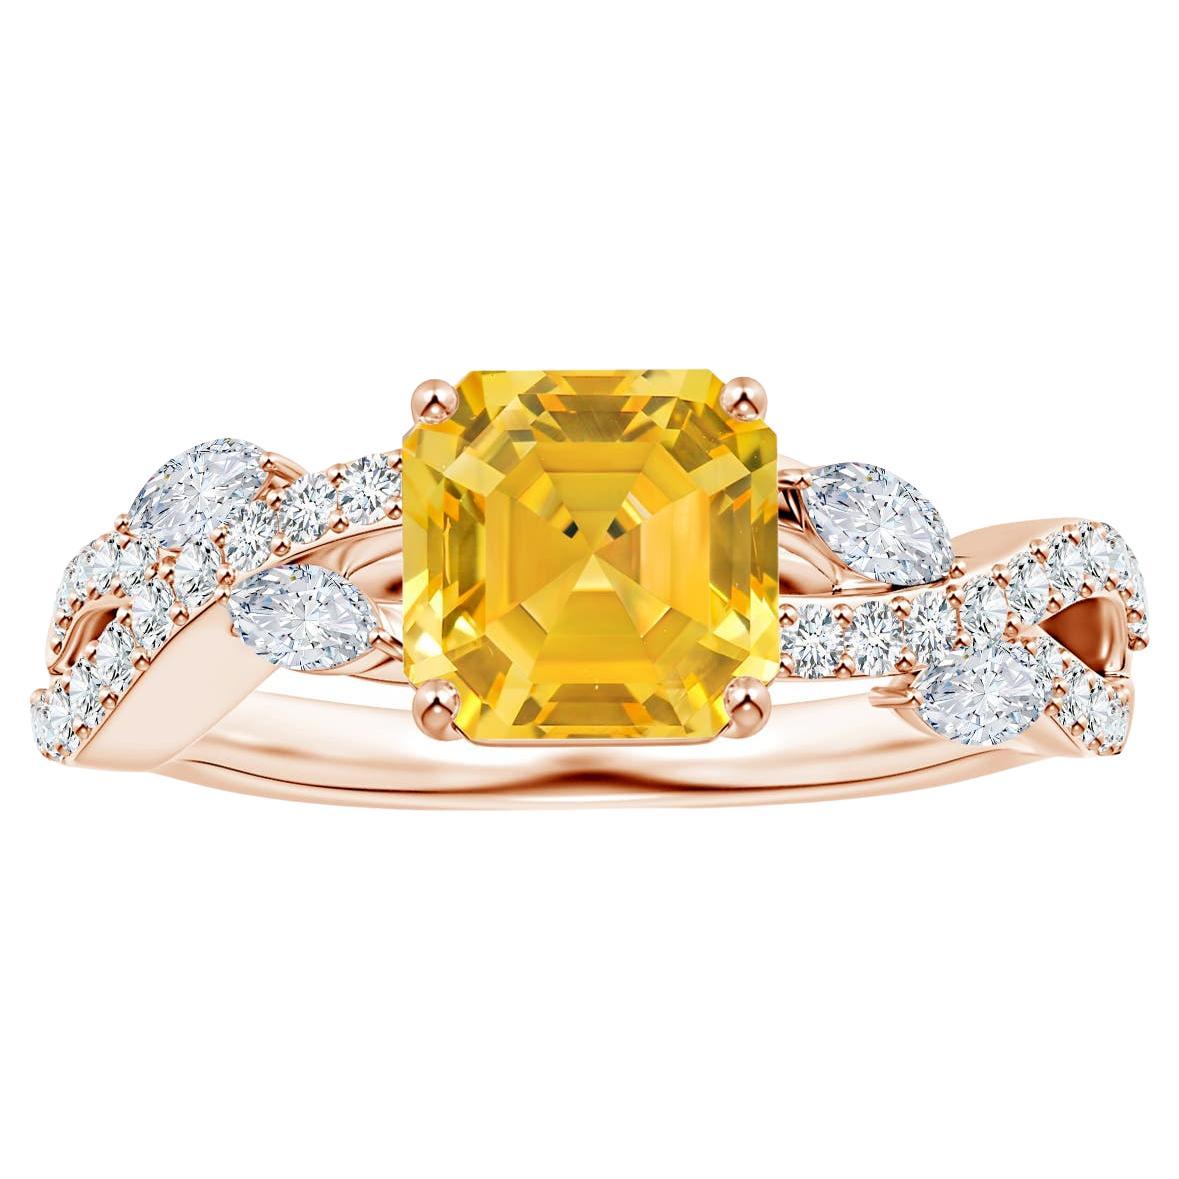 For Sale:  Angara GIA Certified Emerald-Cut Yellow Sapphire Ring in Rose Gold with Diamonds